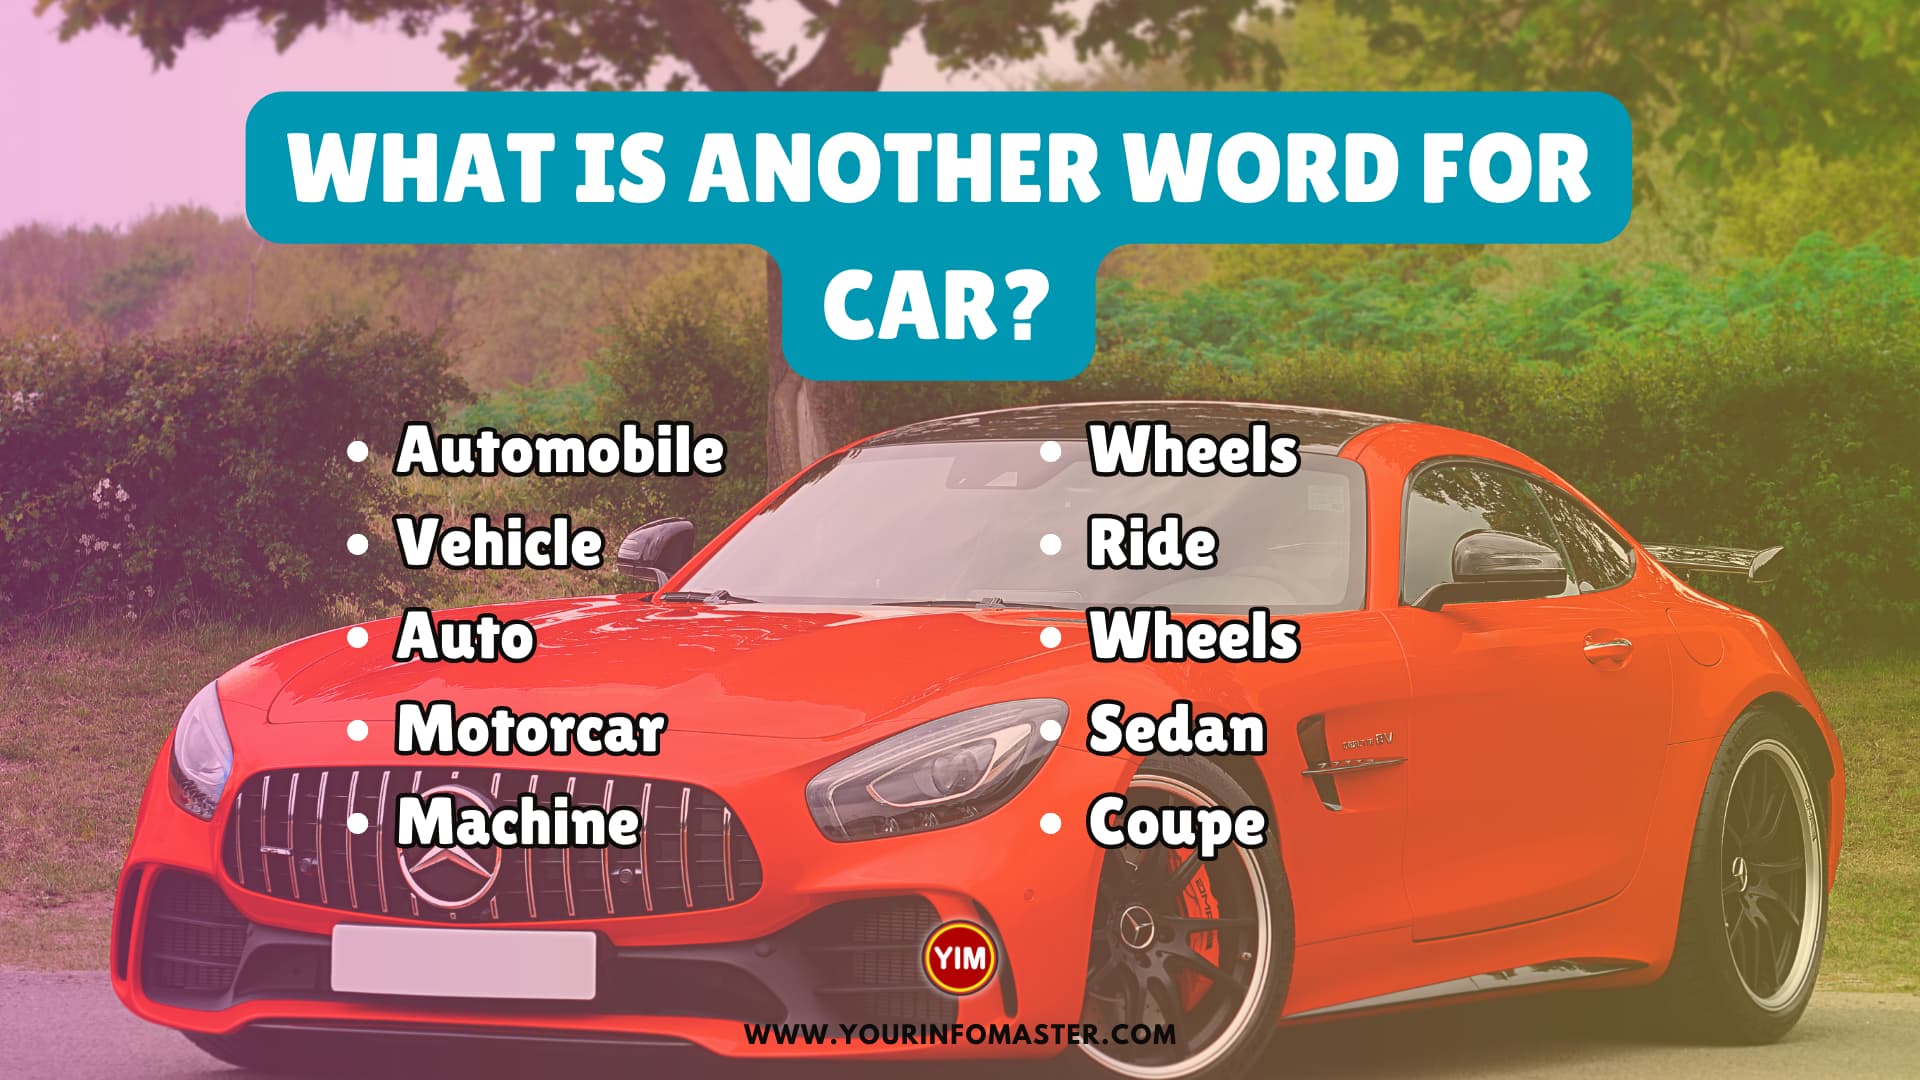 What is another word for Car